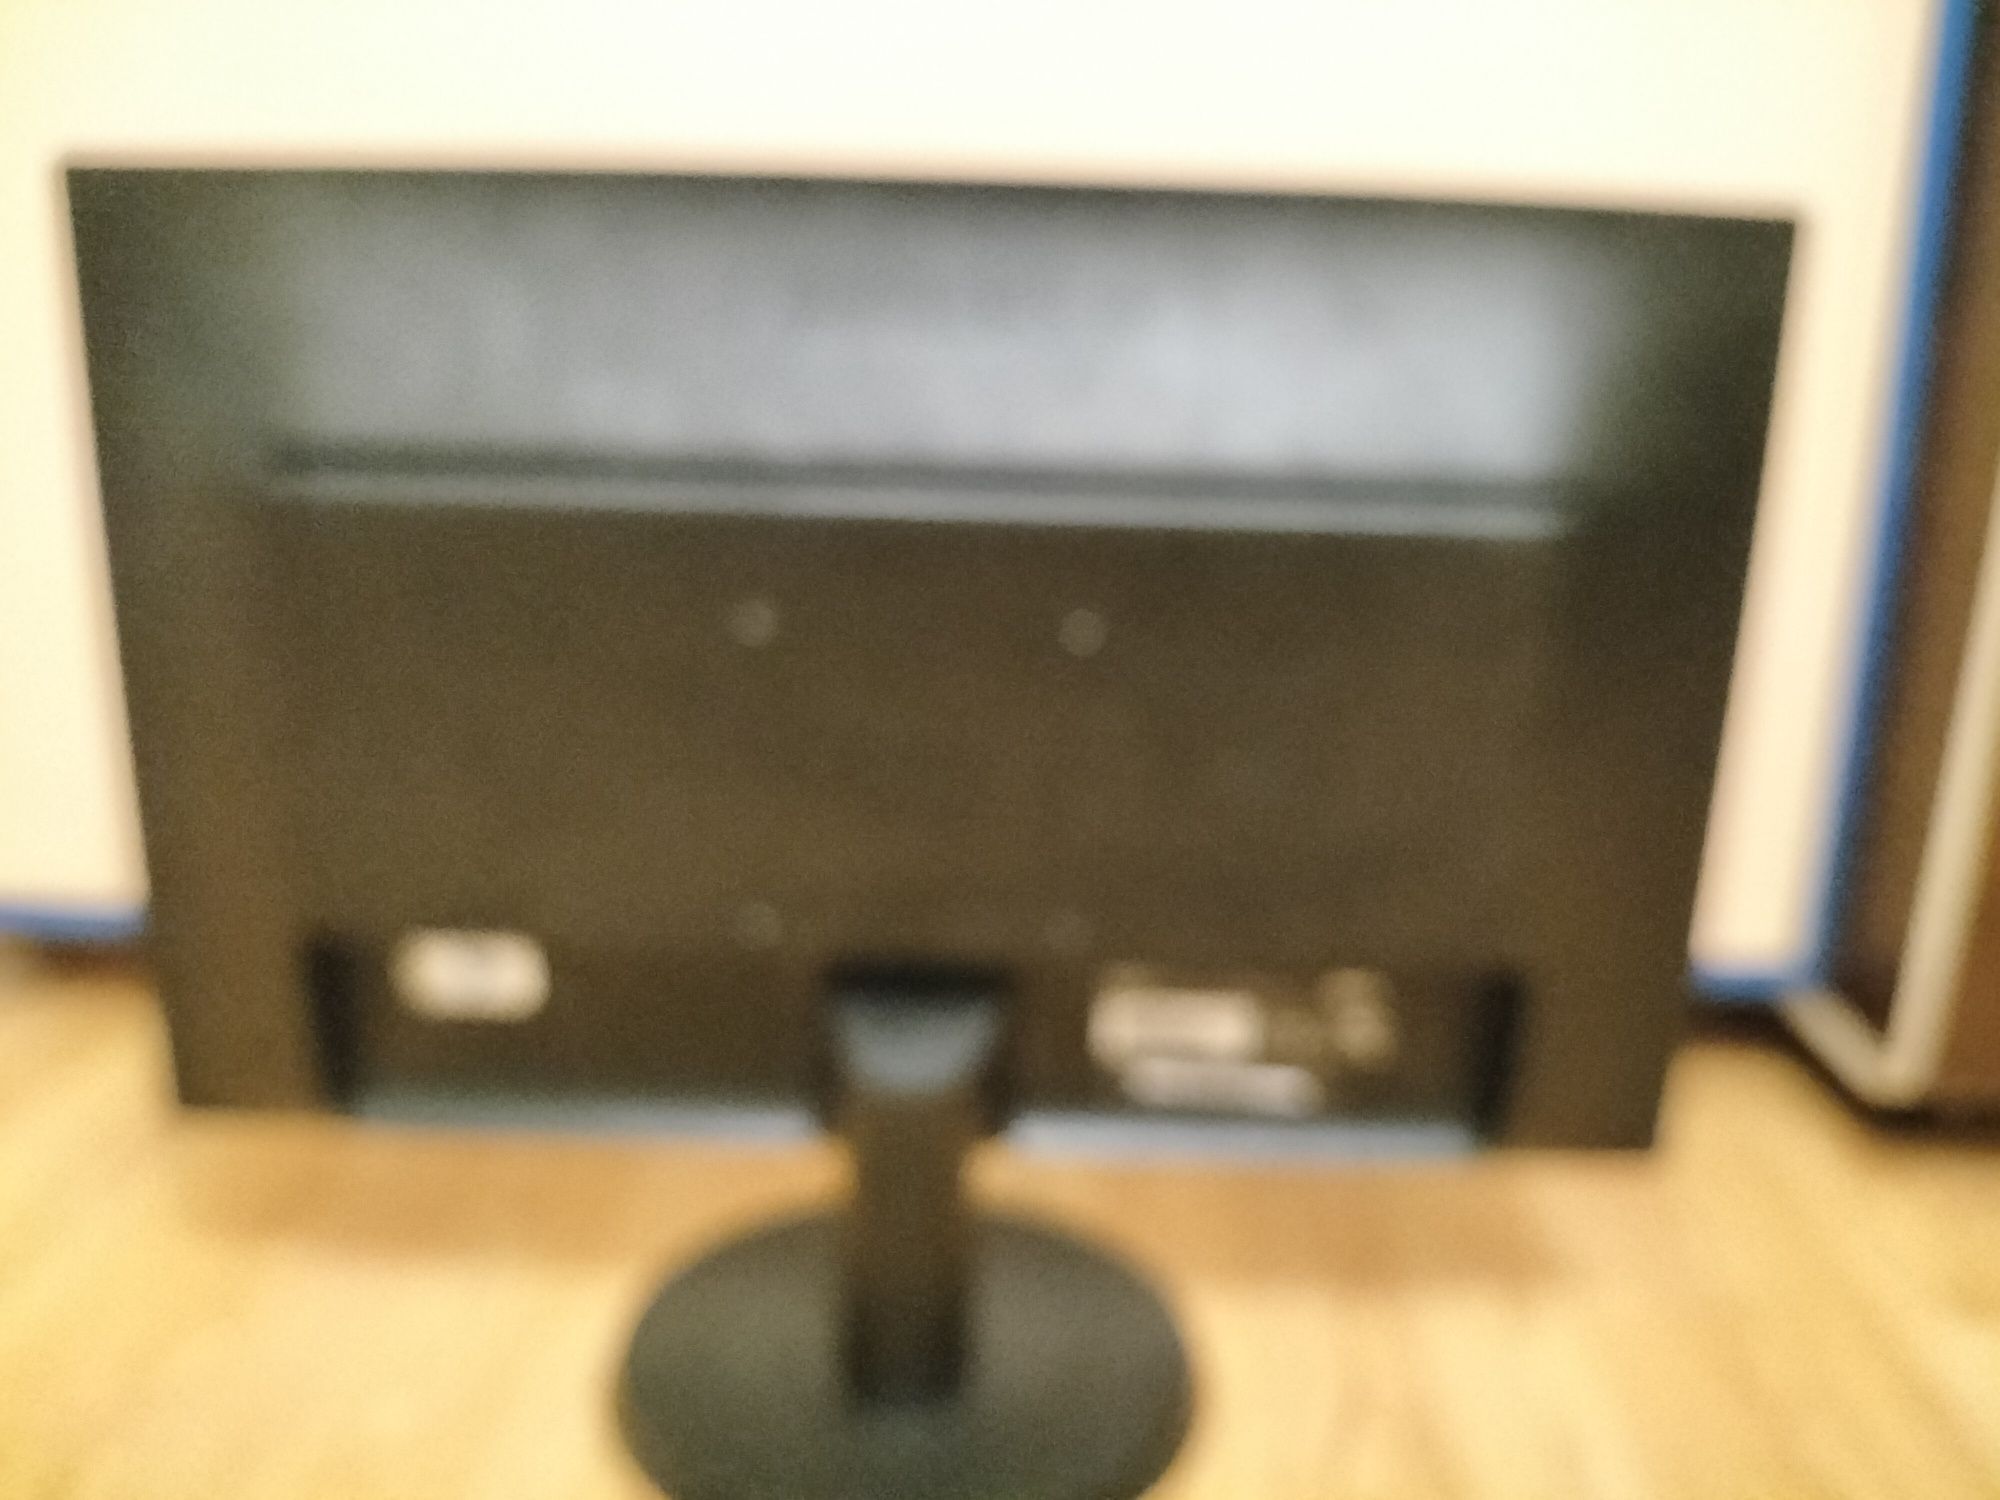 Monitor Philips defect